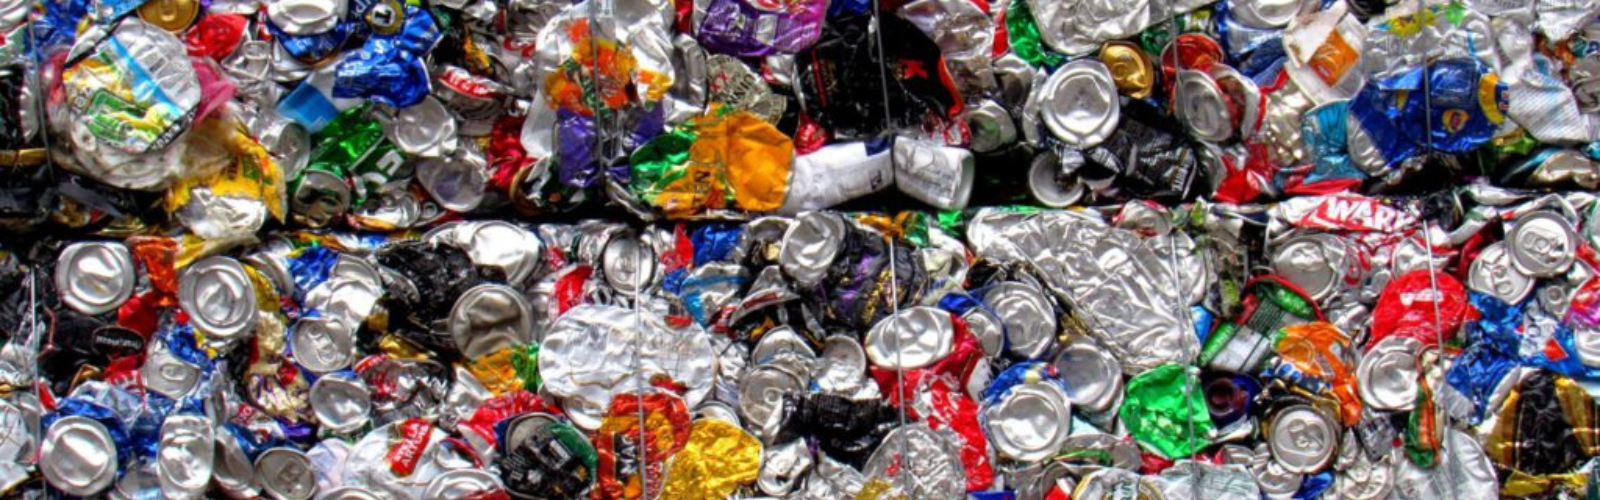 aluminum cans needs recycling